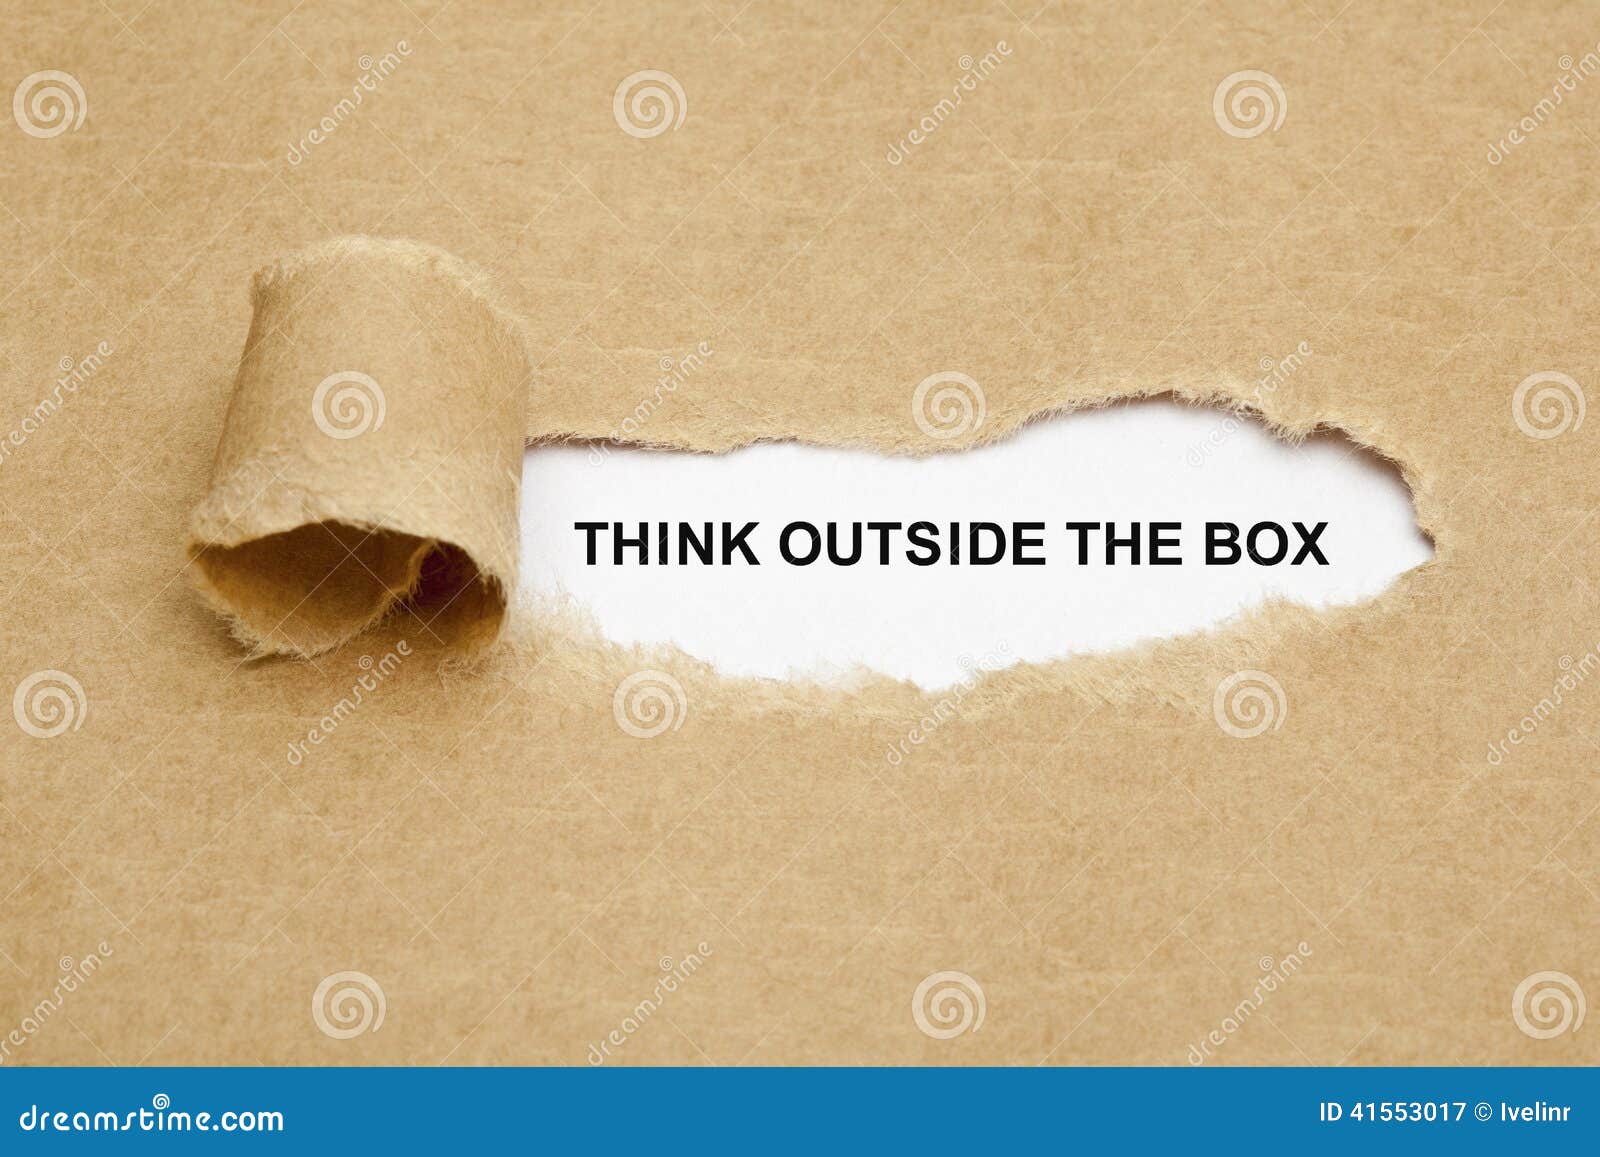 think outside the box torn paper